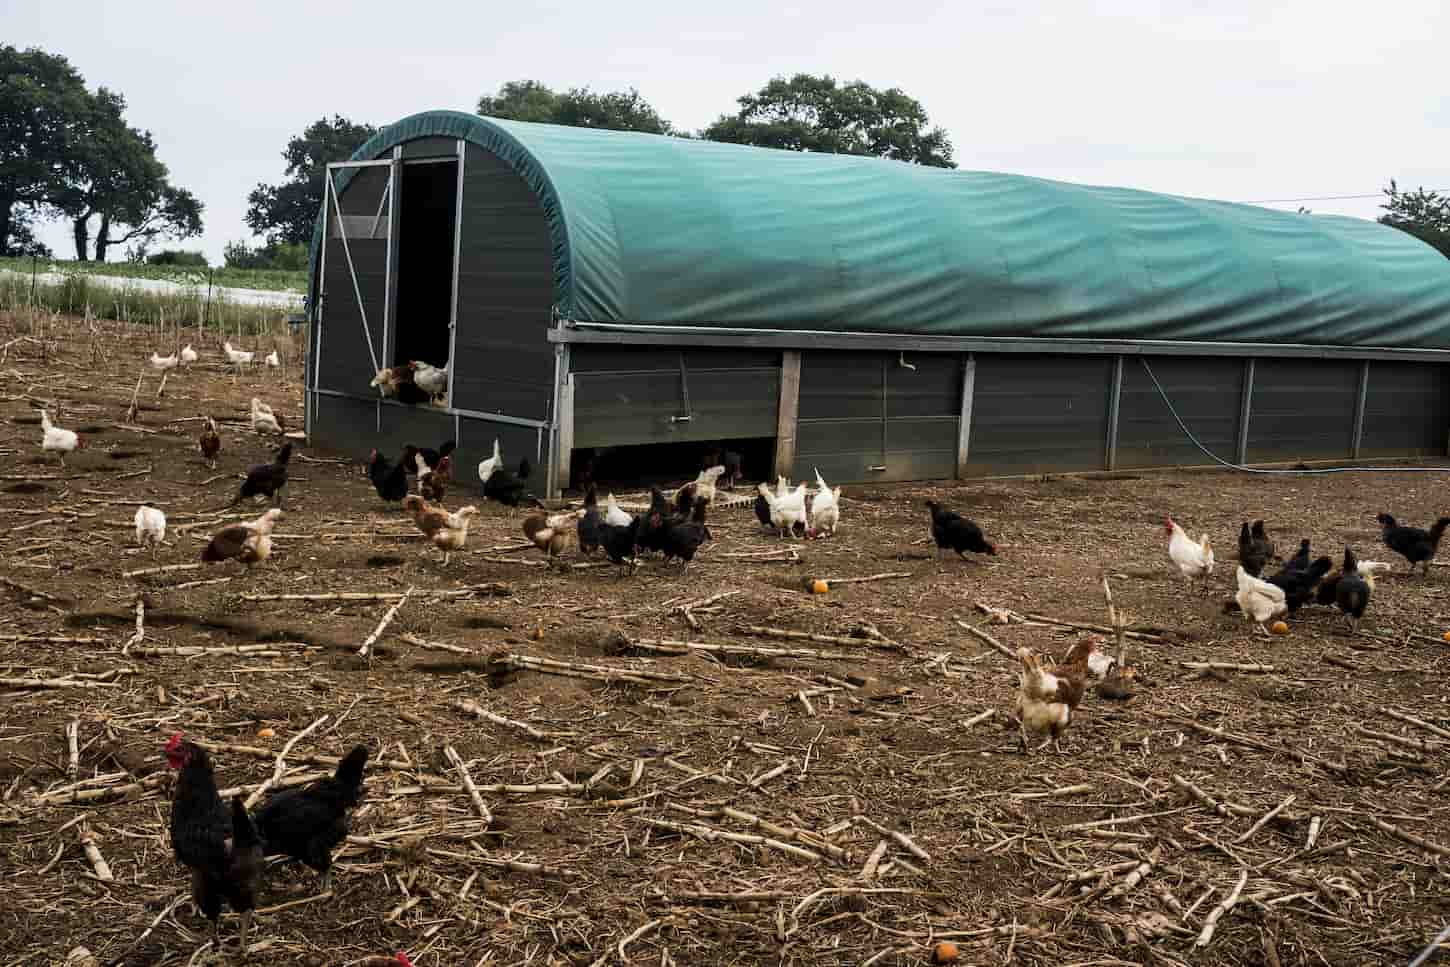 An image of a Flock of chickens around a chicken coop on a farm.